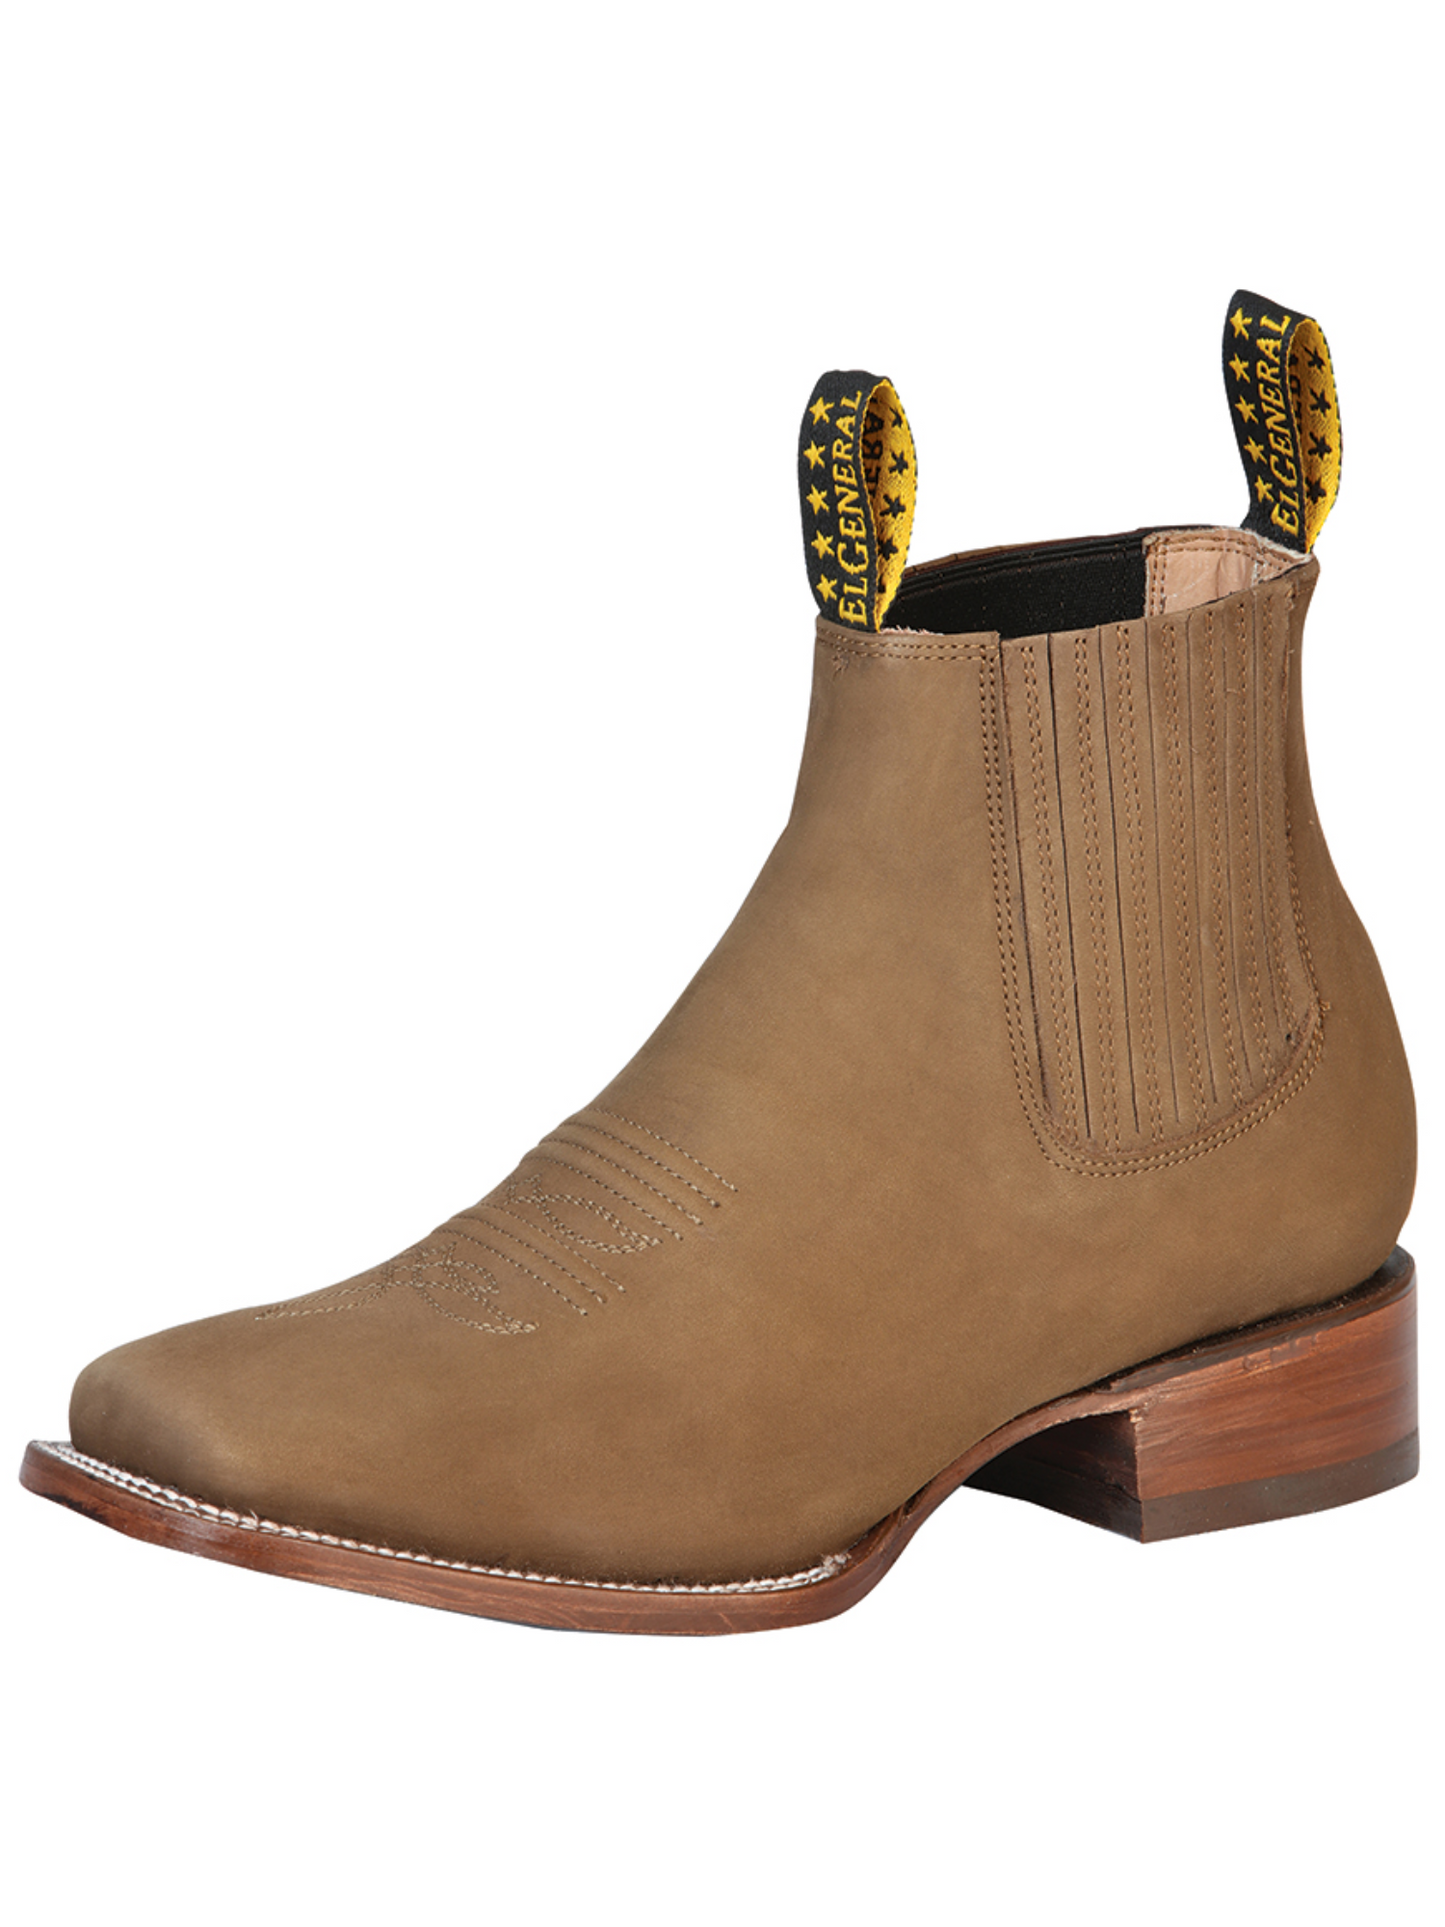 Classic Nubuck Leather Rodeo Cowboy Ankle Boots for Men 'El General' - ID: 126195 Western Ankle Boots El General Cafe